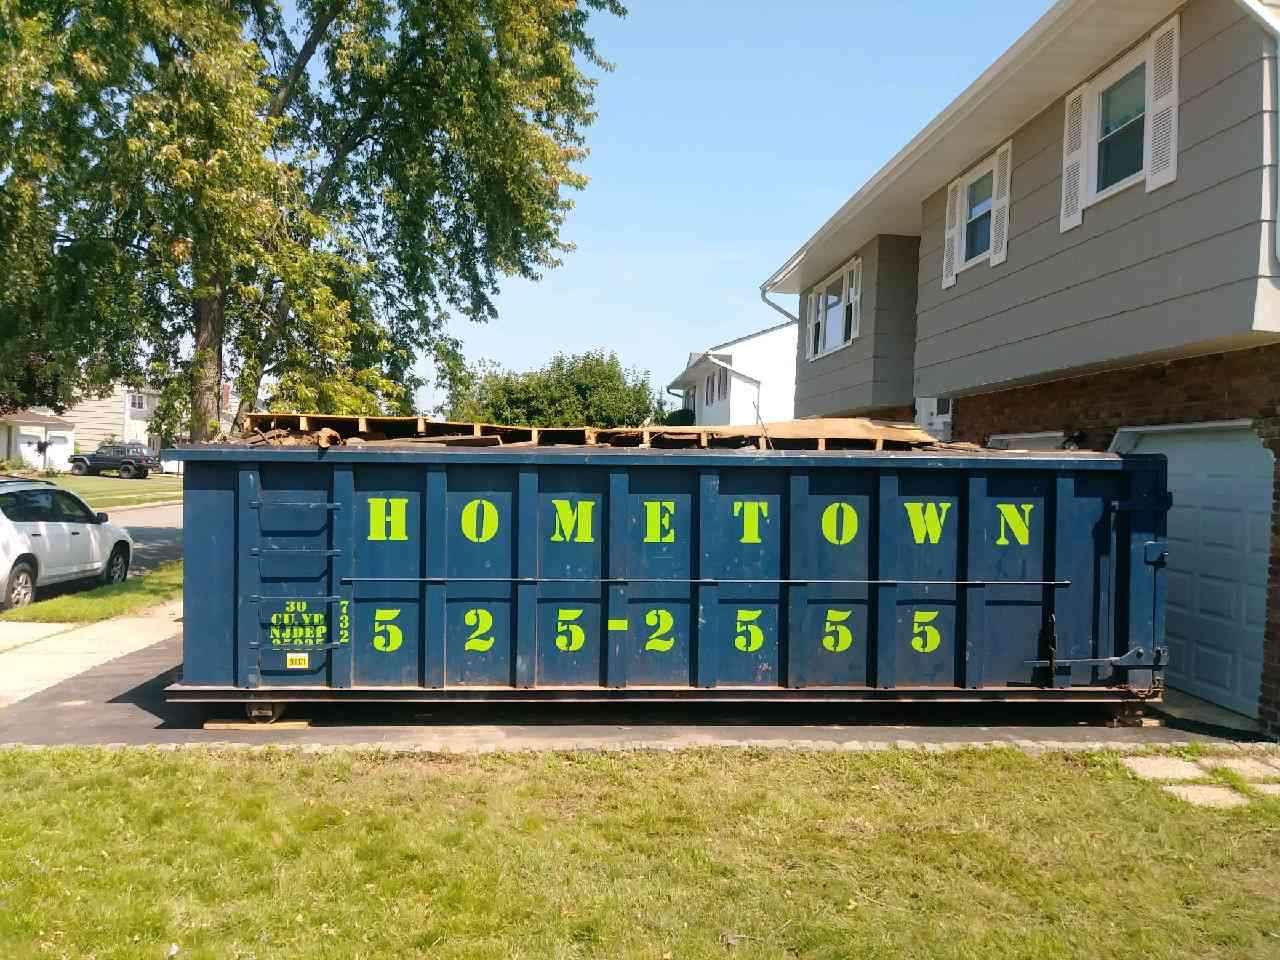 30 yd container at home